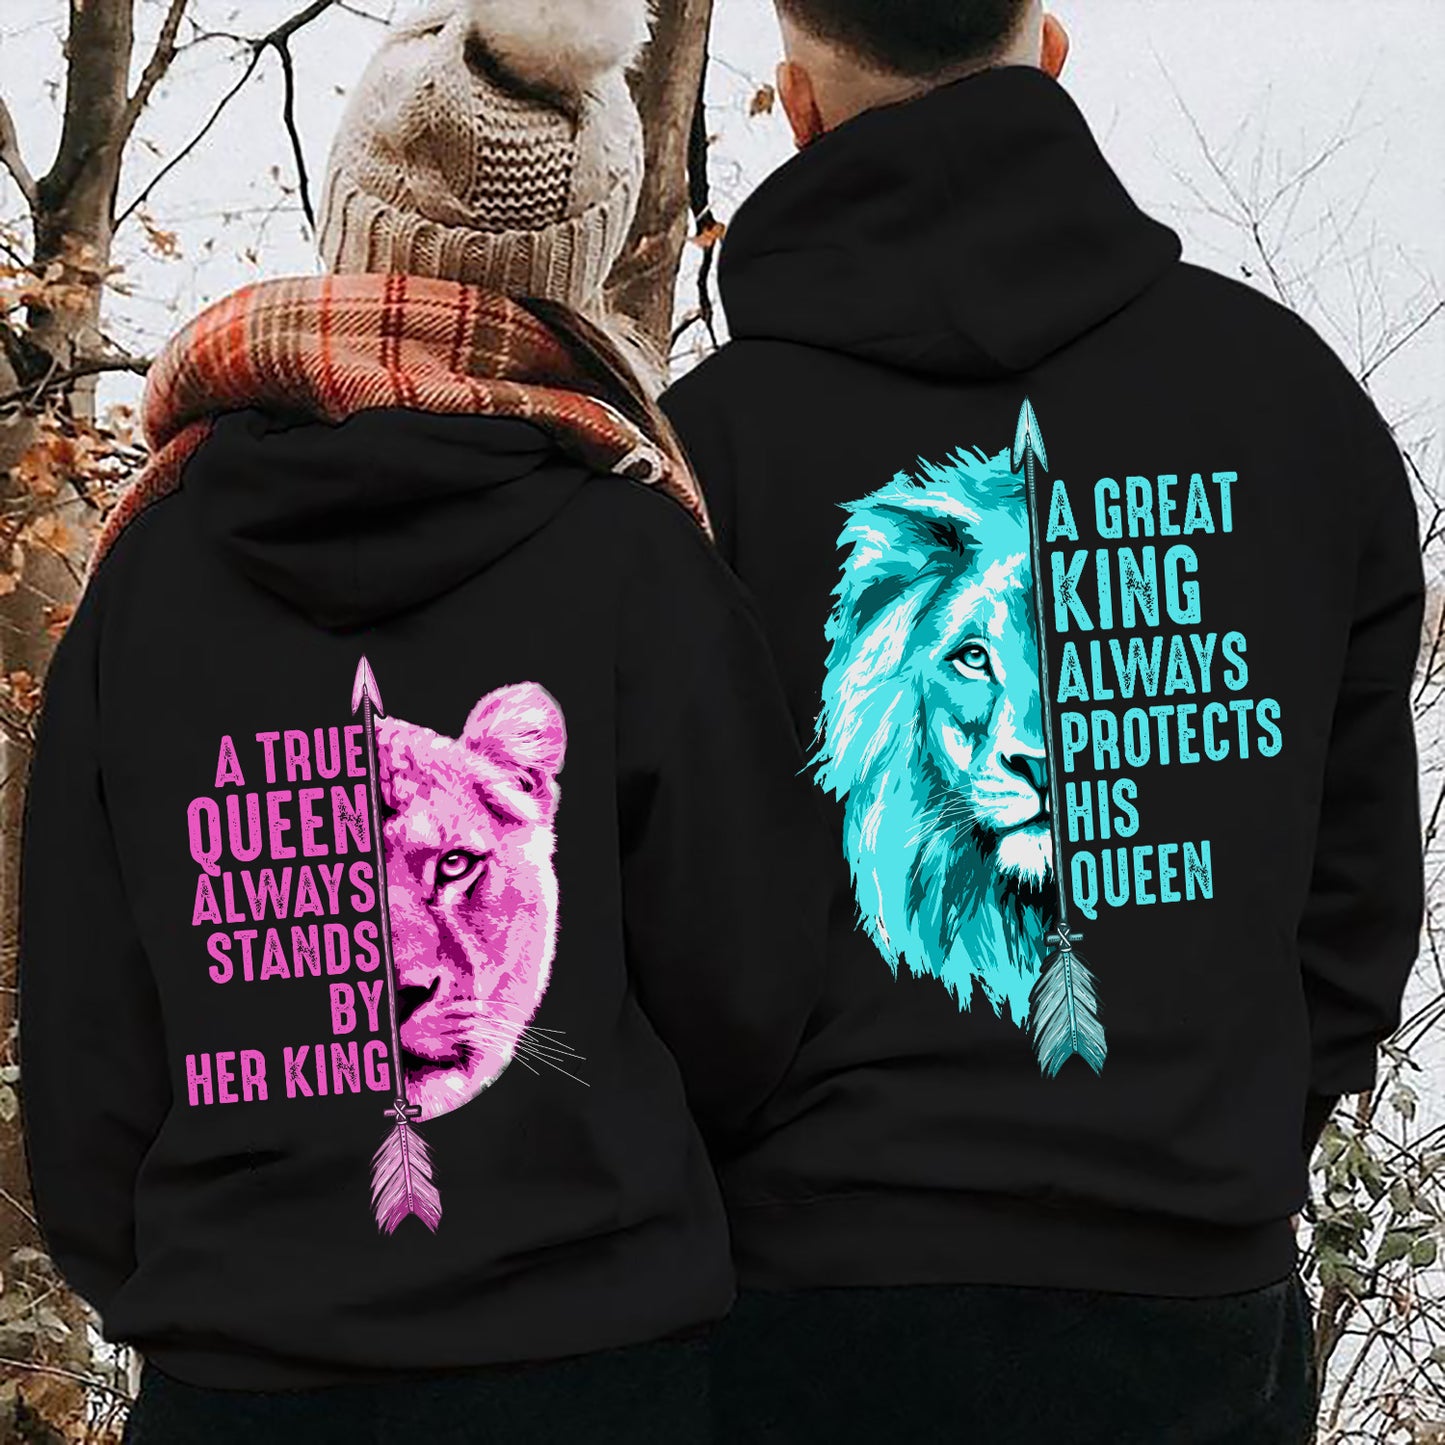 Her King and His Queen Couple Hoodies Valentine Gift Couple Matching Hoodie